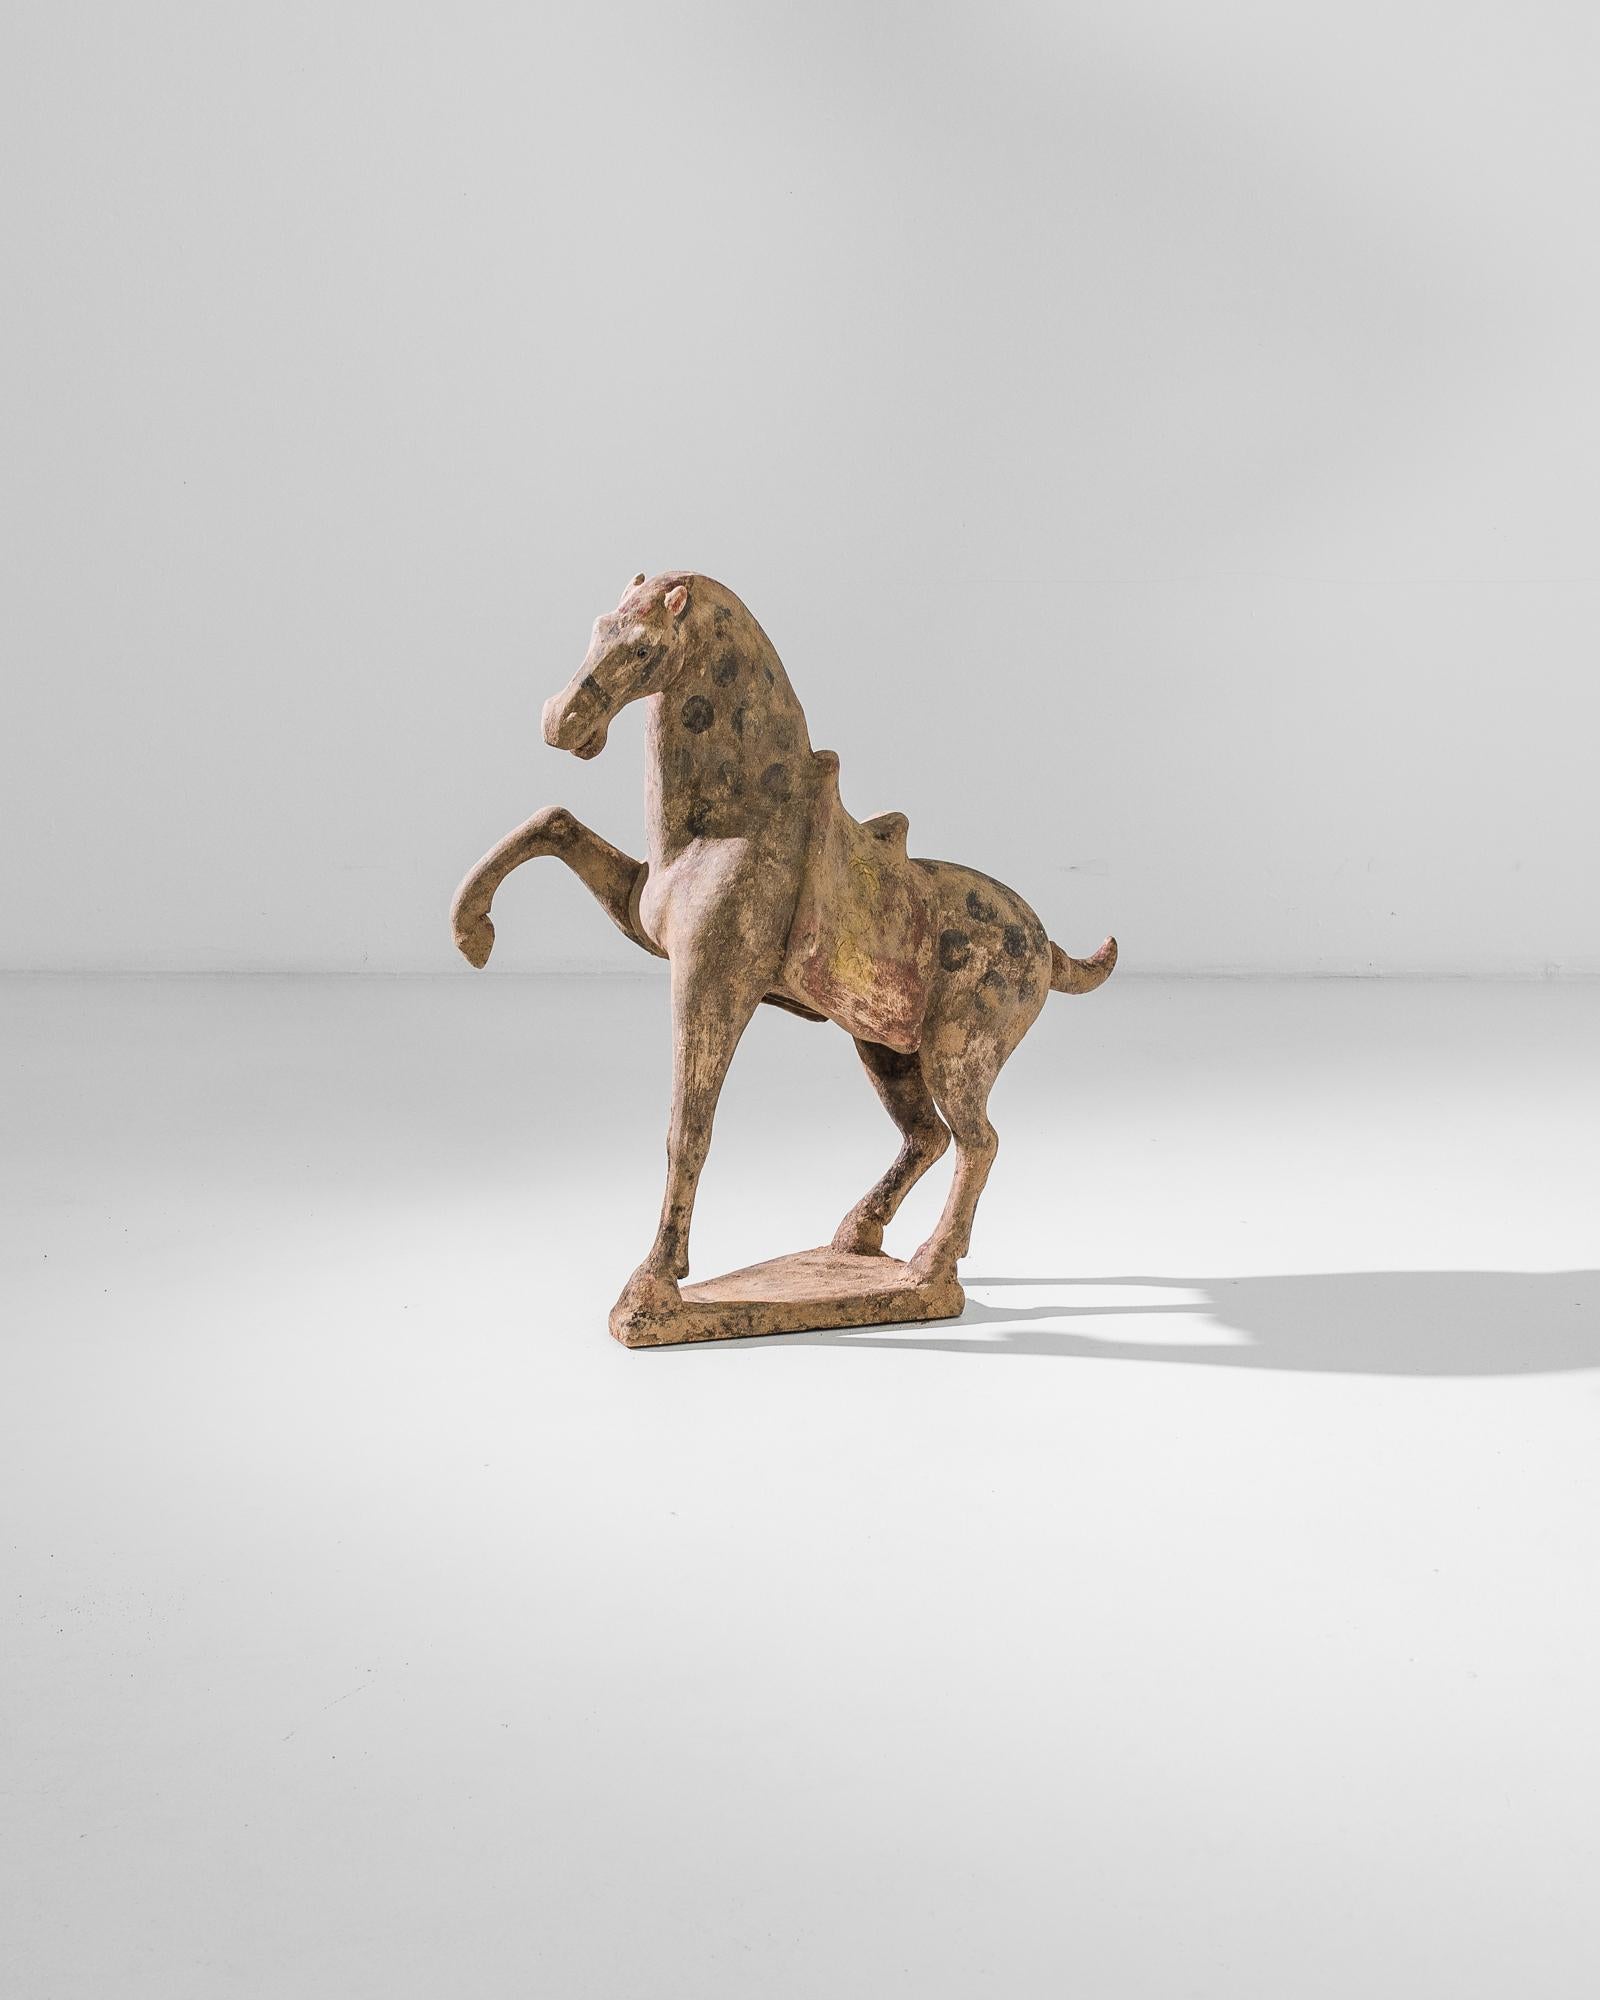 A warm, natural color palette — terra-cotta red and charcoal black — and a textural finish give this jubilant horse a wholesome appeal. The silhouette is simple and harmonious; the kicking front leg is counterbalanced by the spirited up-flick of the